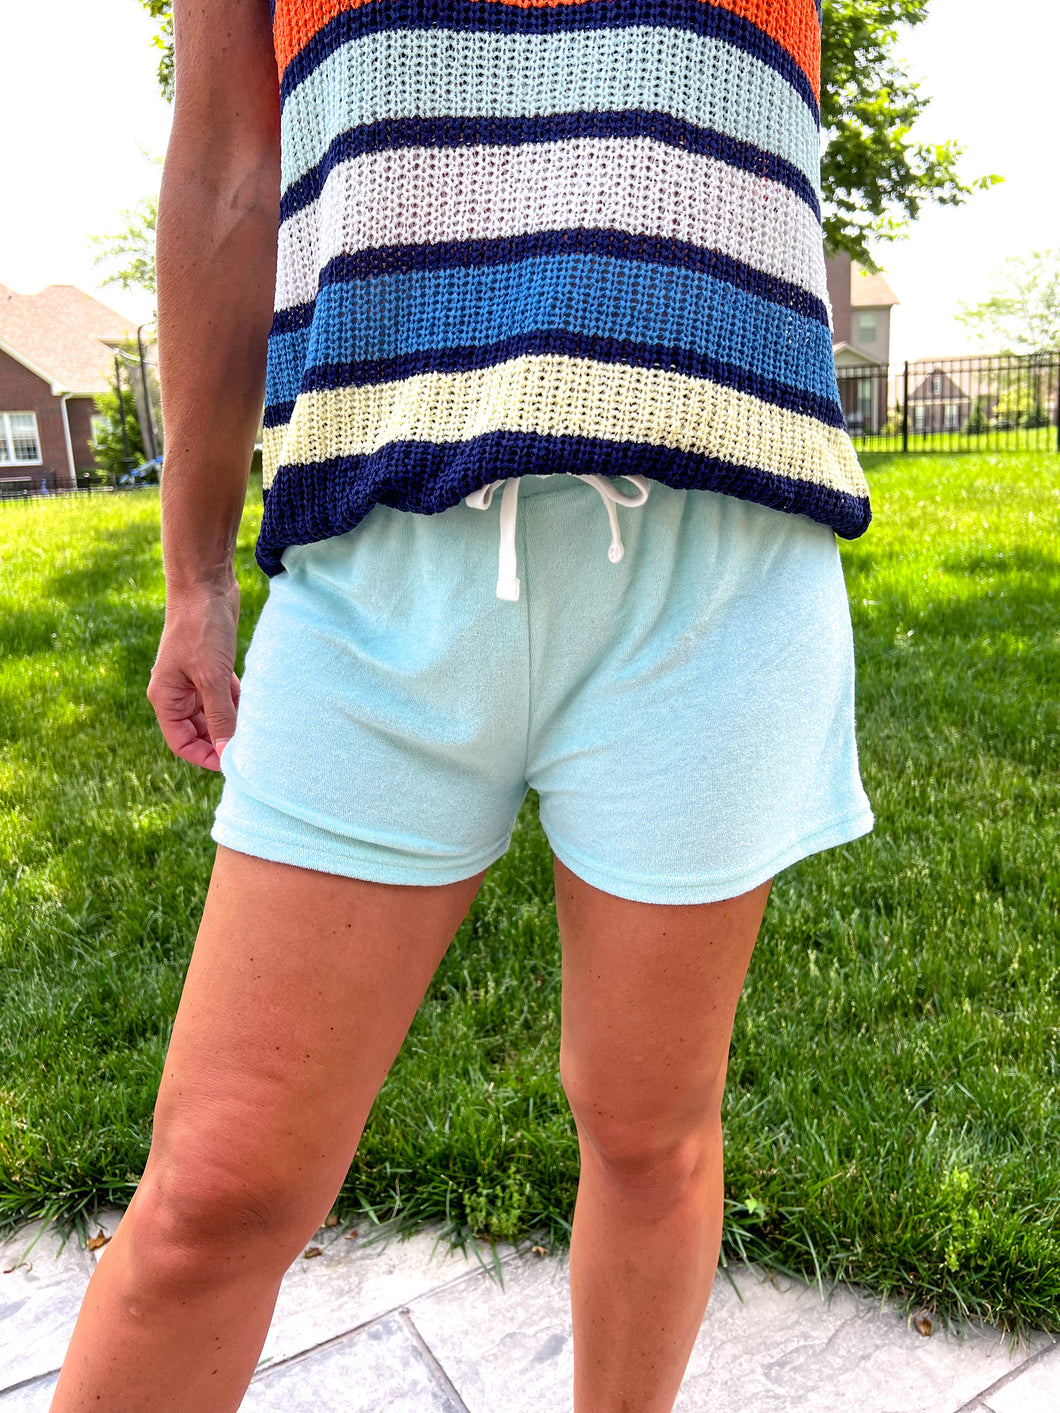 Poolside Terry Cloth Short